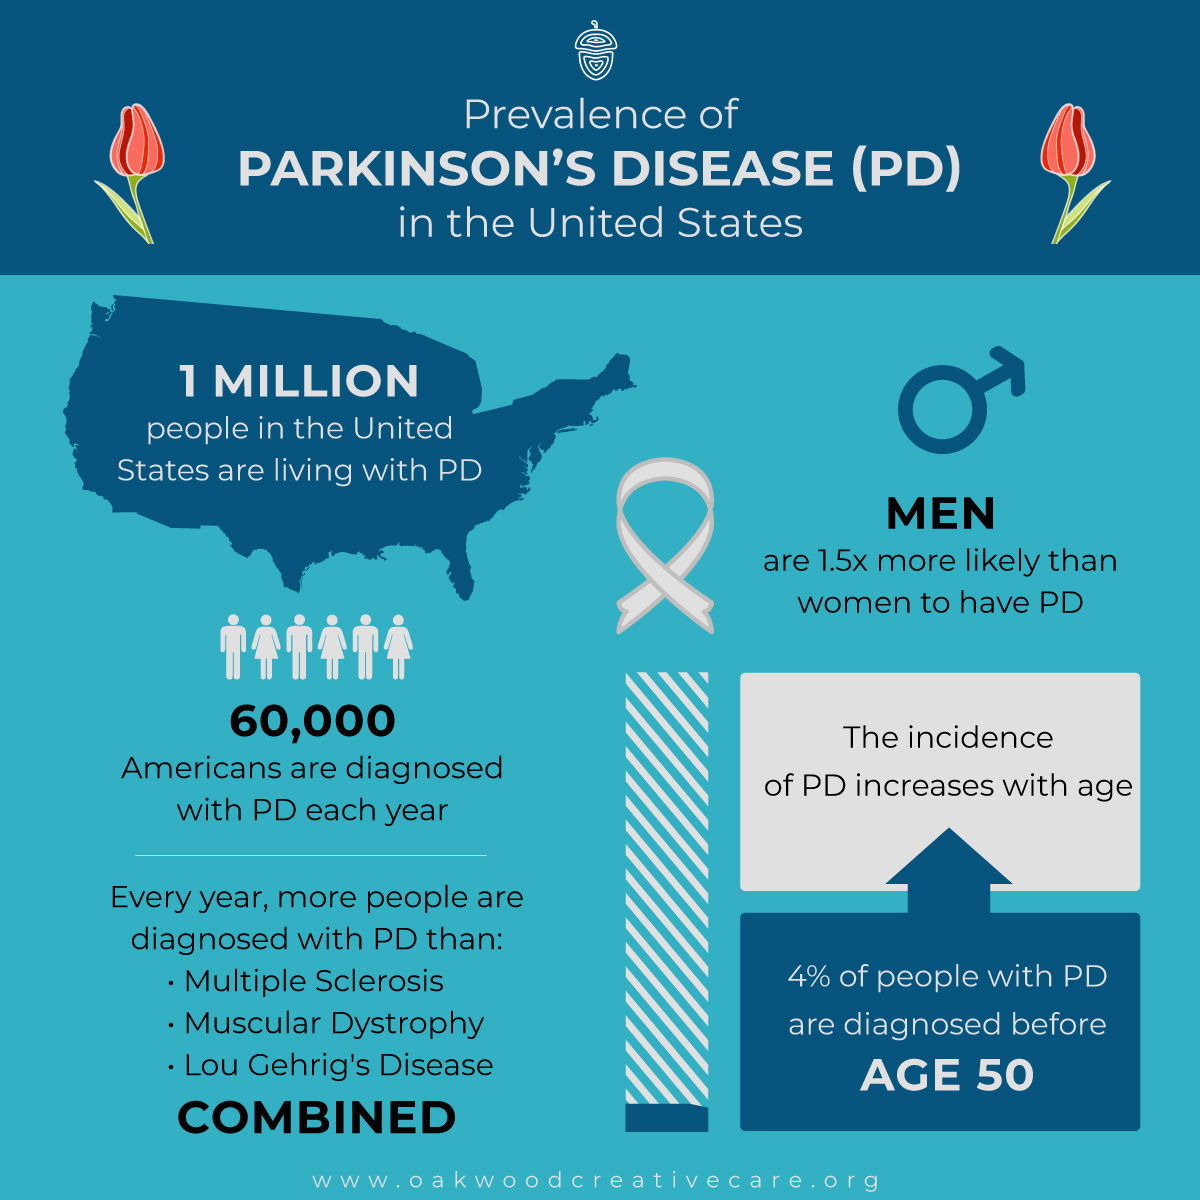 Prevalence of Parkinson's Disease in the United States